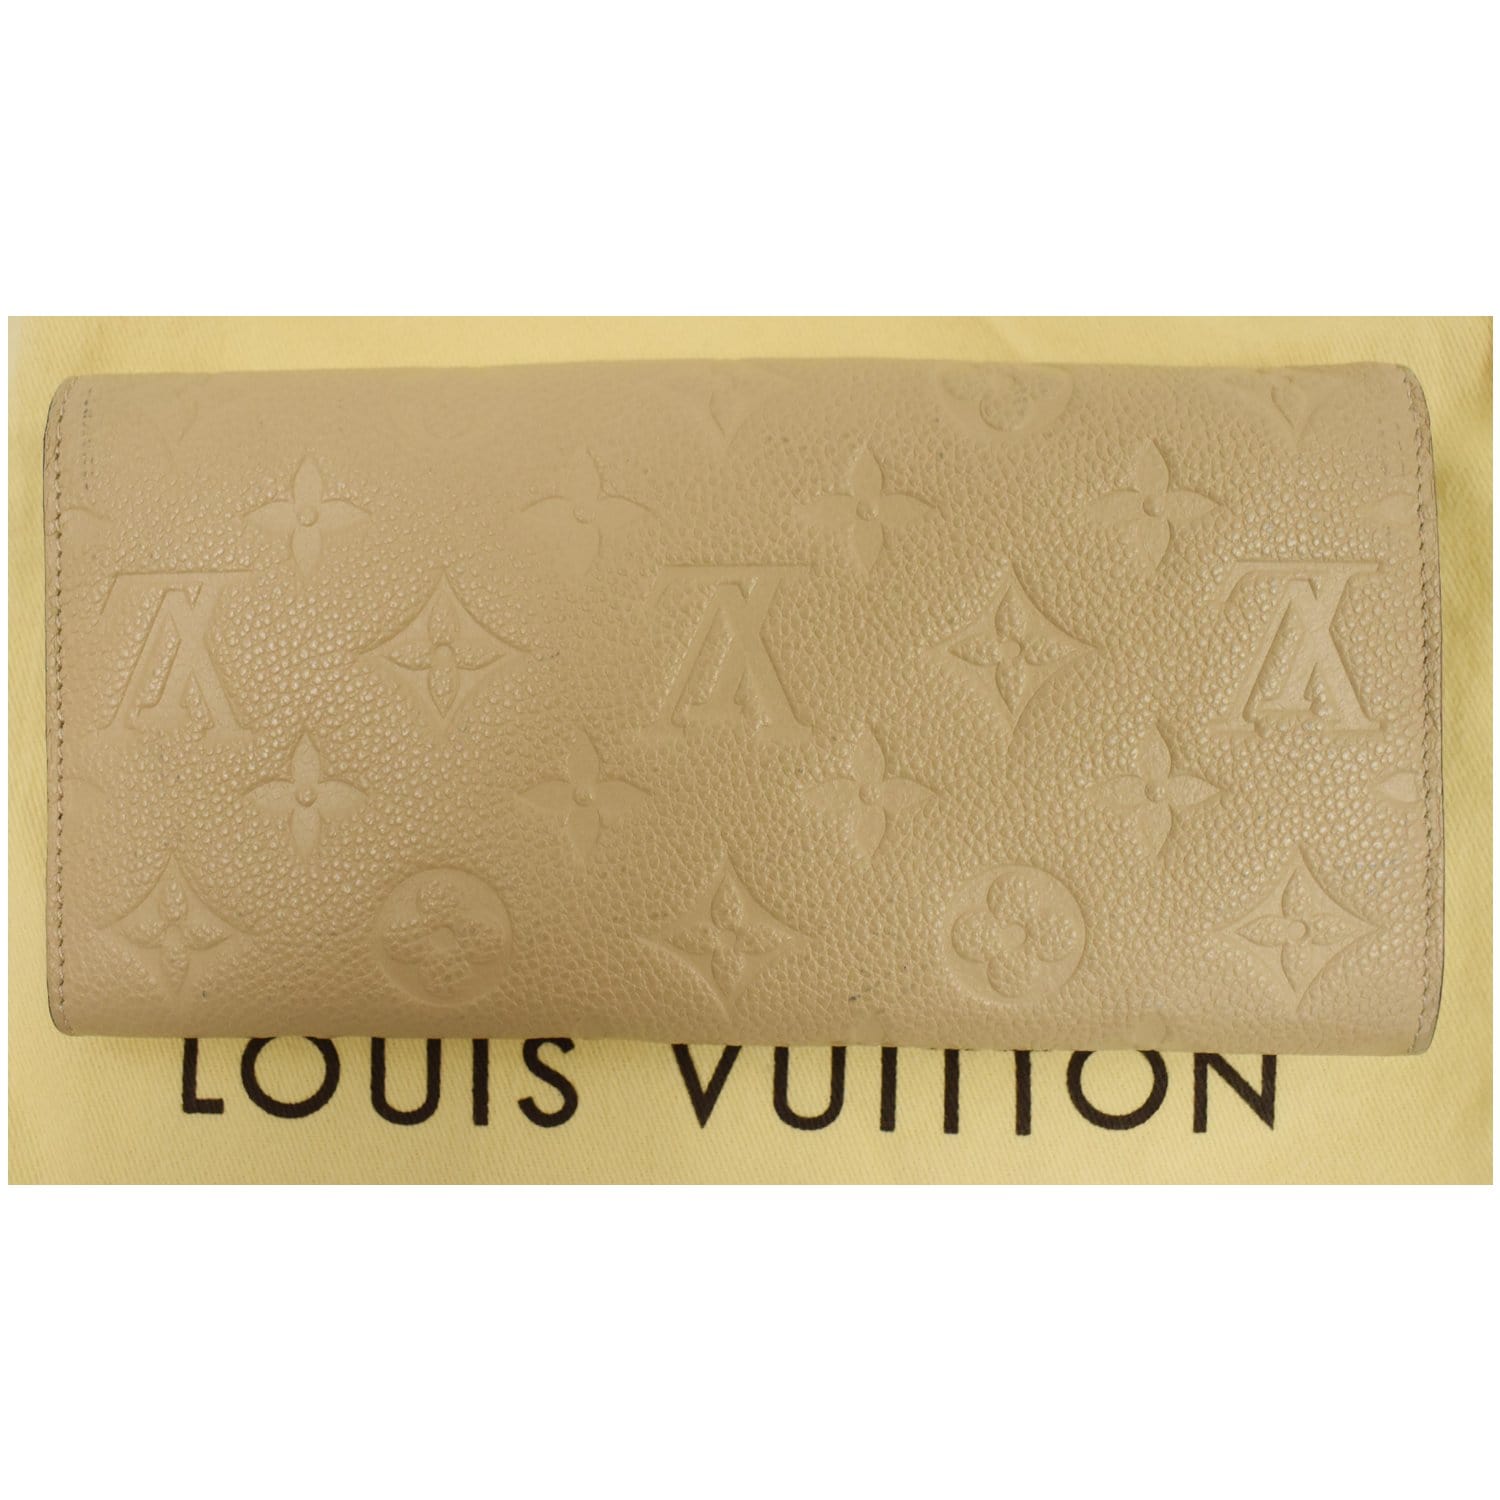 e-glampot.com on Instagram: *SOLD* 1730-1110 Louis Vuitton Orient Monogram  Empreinte Leather Curieuse Wallet Date code: CA2143 Condition: 7/10 Obvious  signs of wear Remarks: Used with obvious signs of wear; melted/sticky  glazing with